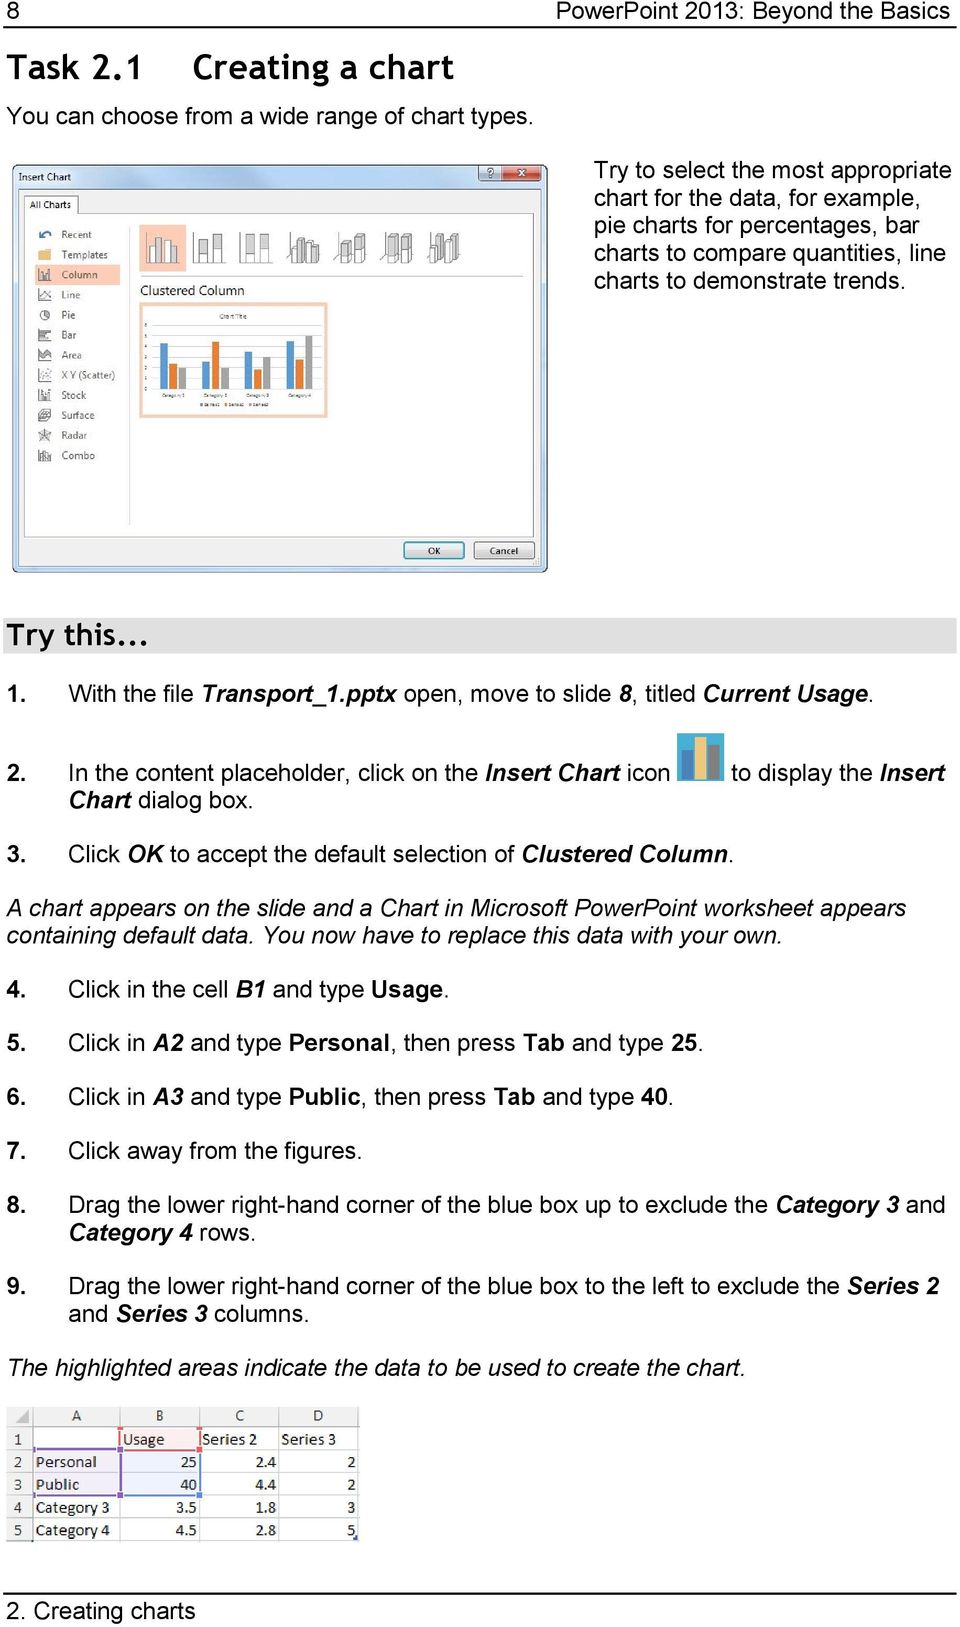 With the file Transport_1.pptx open, move to slide 8, titled Current Usage. 2. In the content placeholder, click on the Insert Chart icon to display the Insert Chart dialog box. 3.